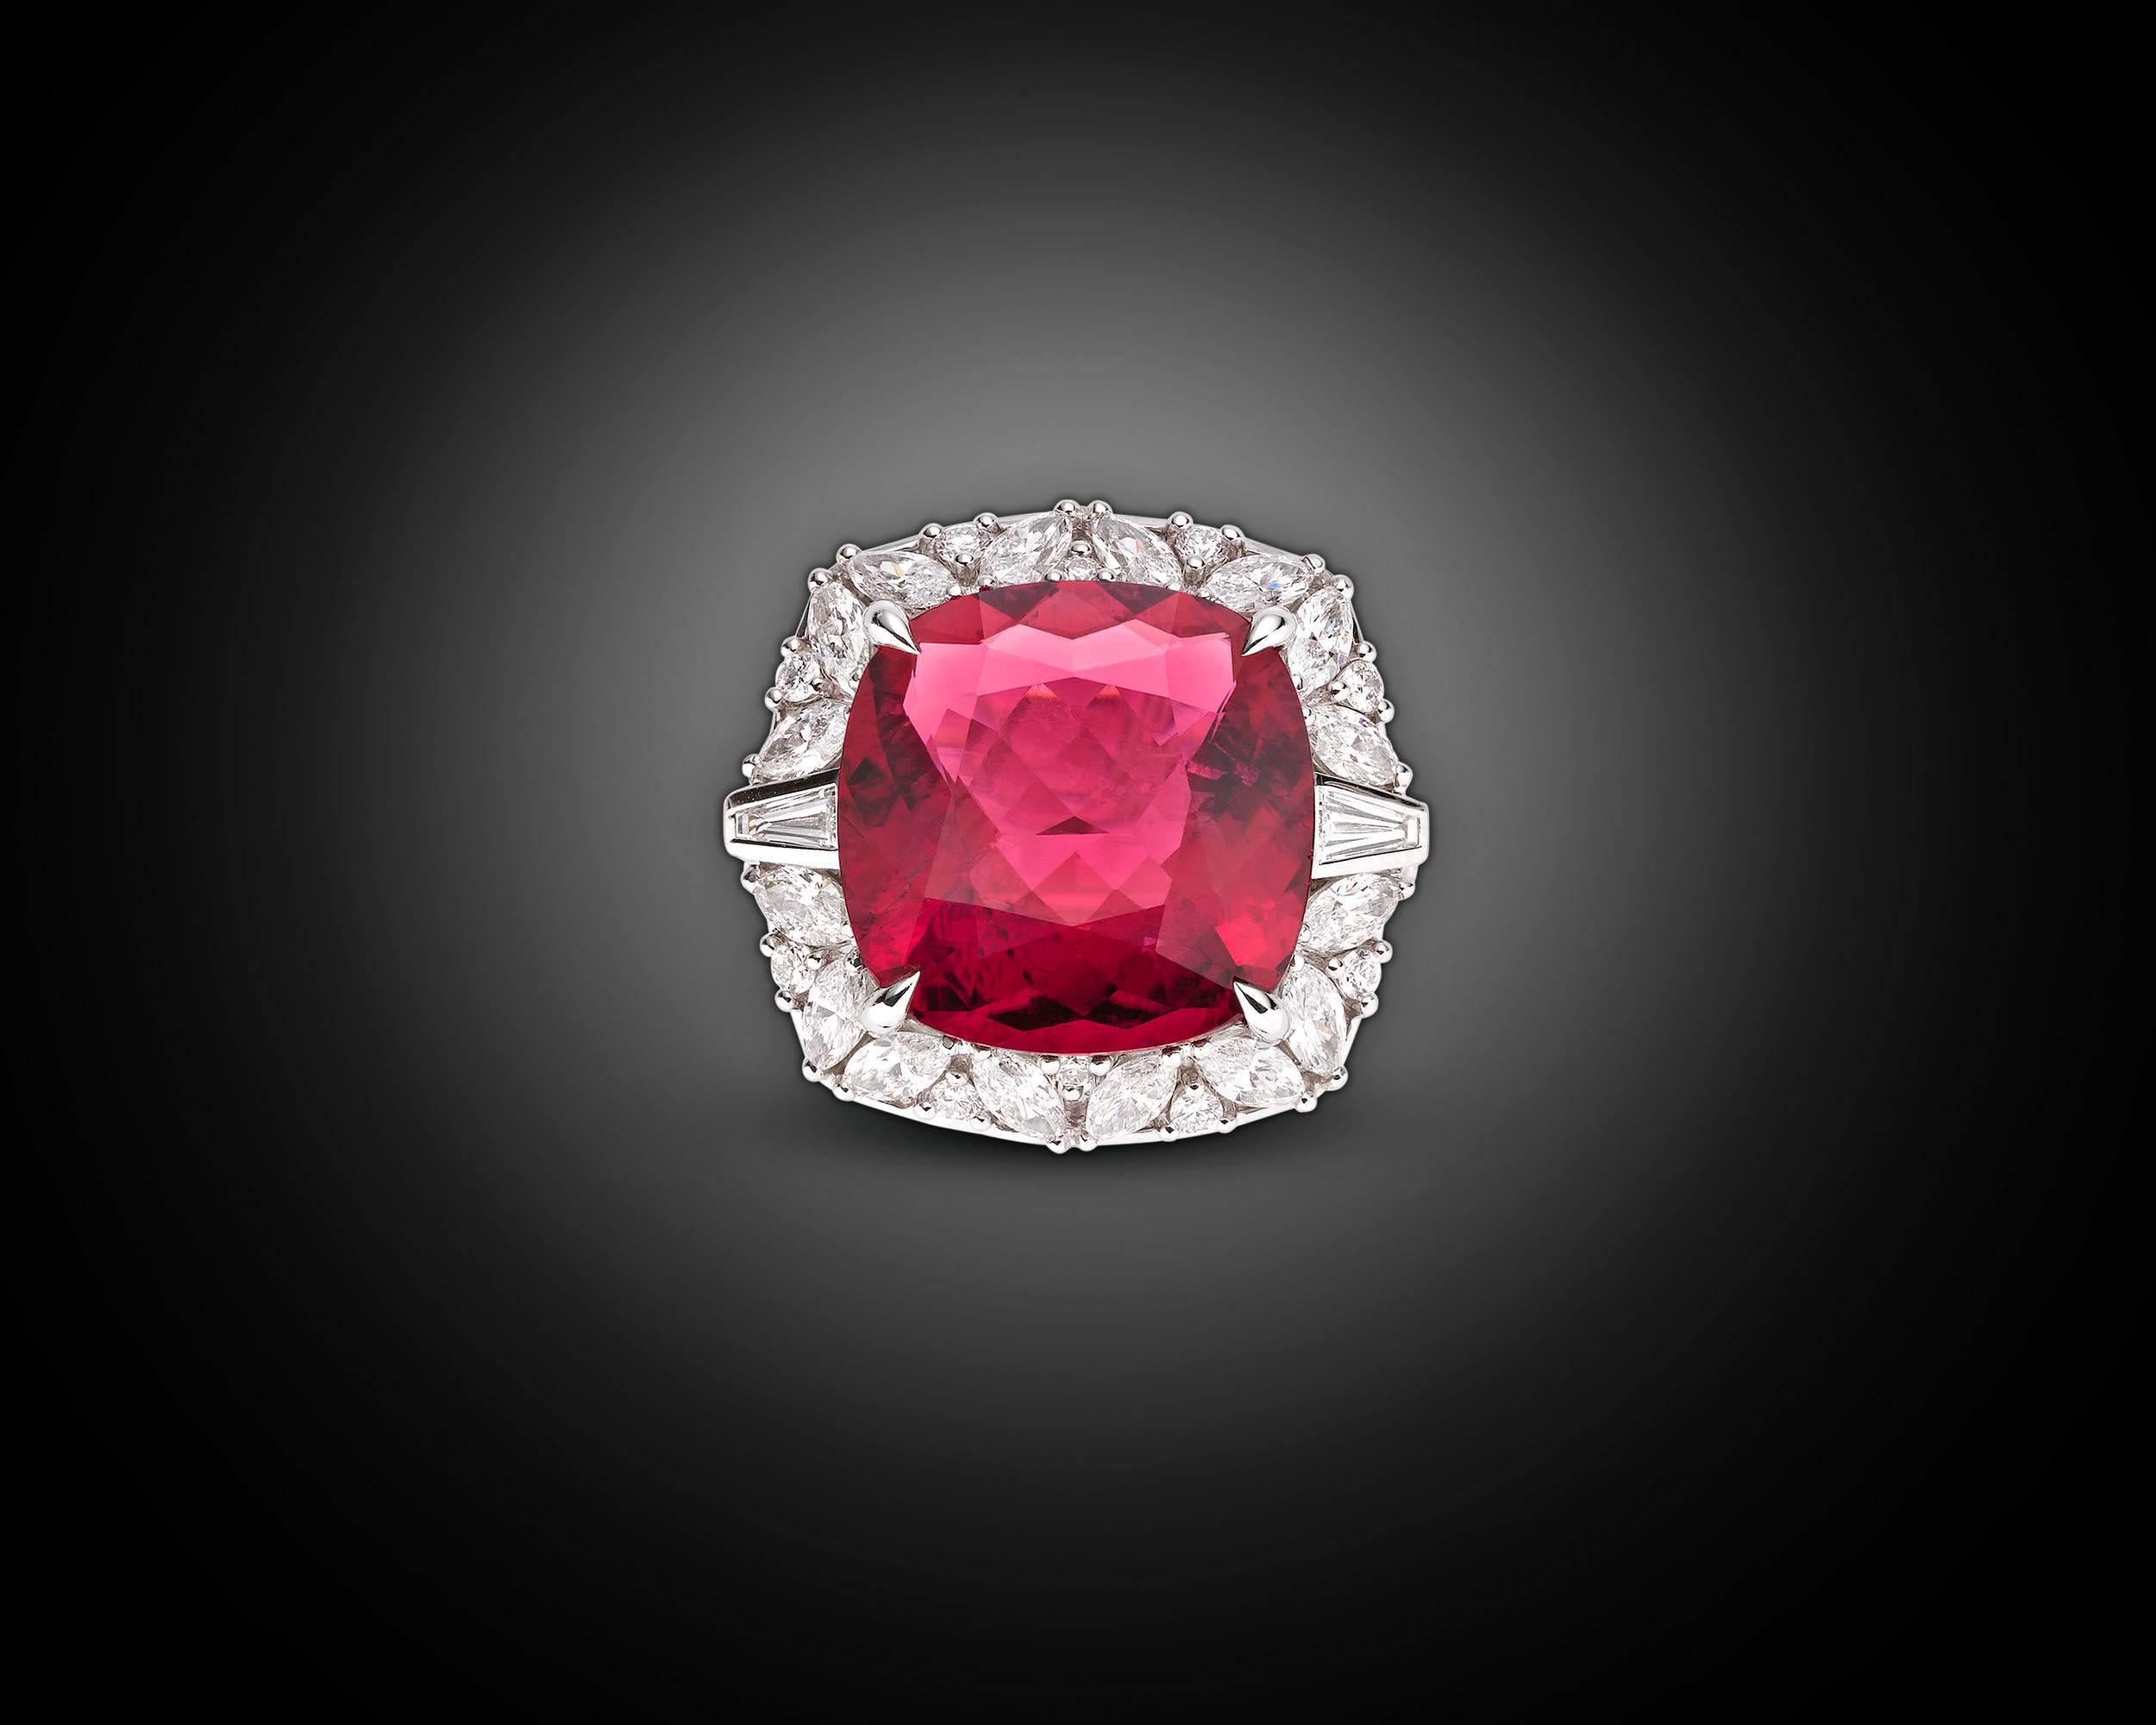 A stunning rubellite tourmaline with a bright, richly saturated crimson hue radiates in this eye-catching cocktail ring. Weighing 9.38 brilliant carats, the gorgeous gemstone is enveloped by a sparkling cushion of diamonds totaling 1.87 carats. The